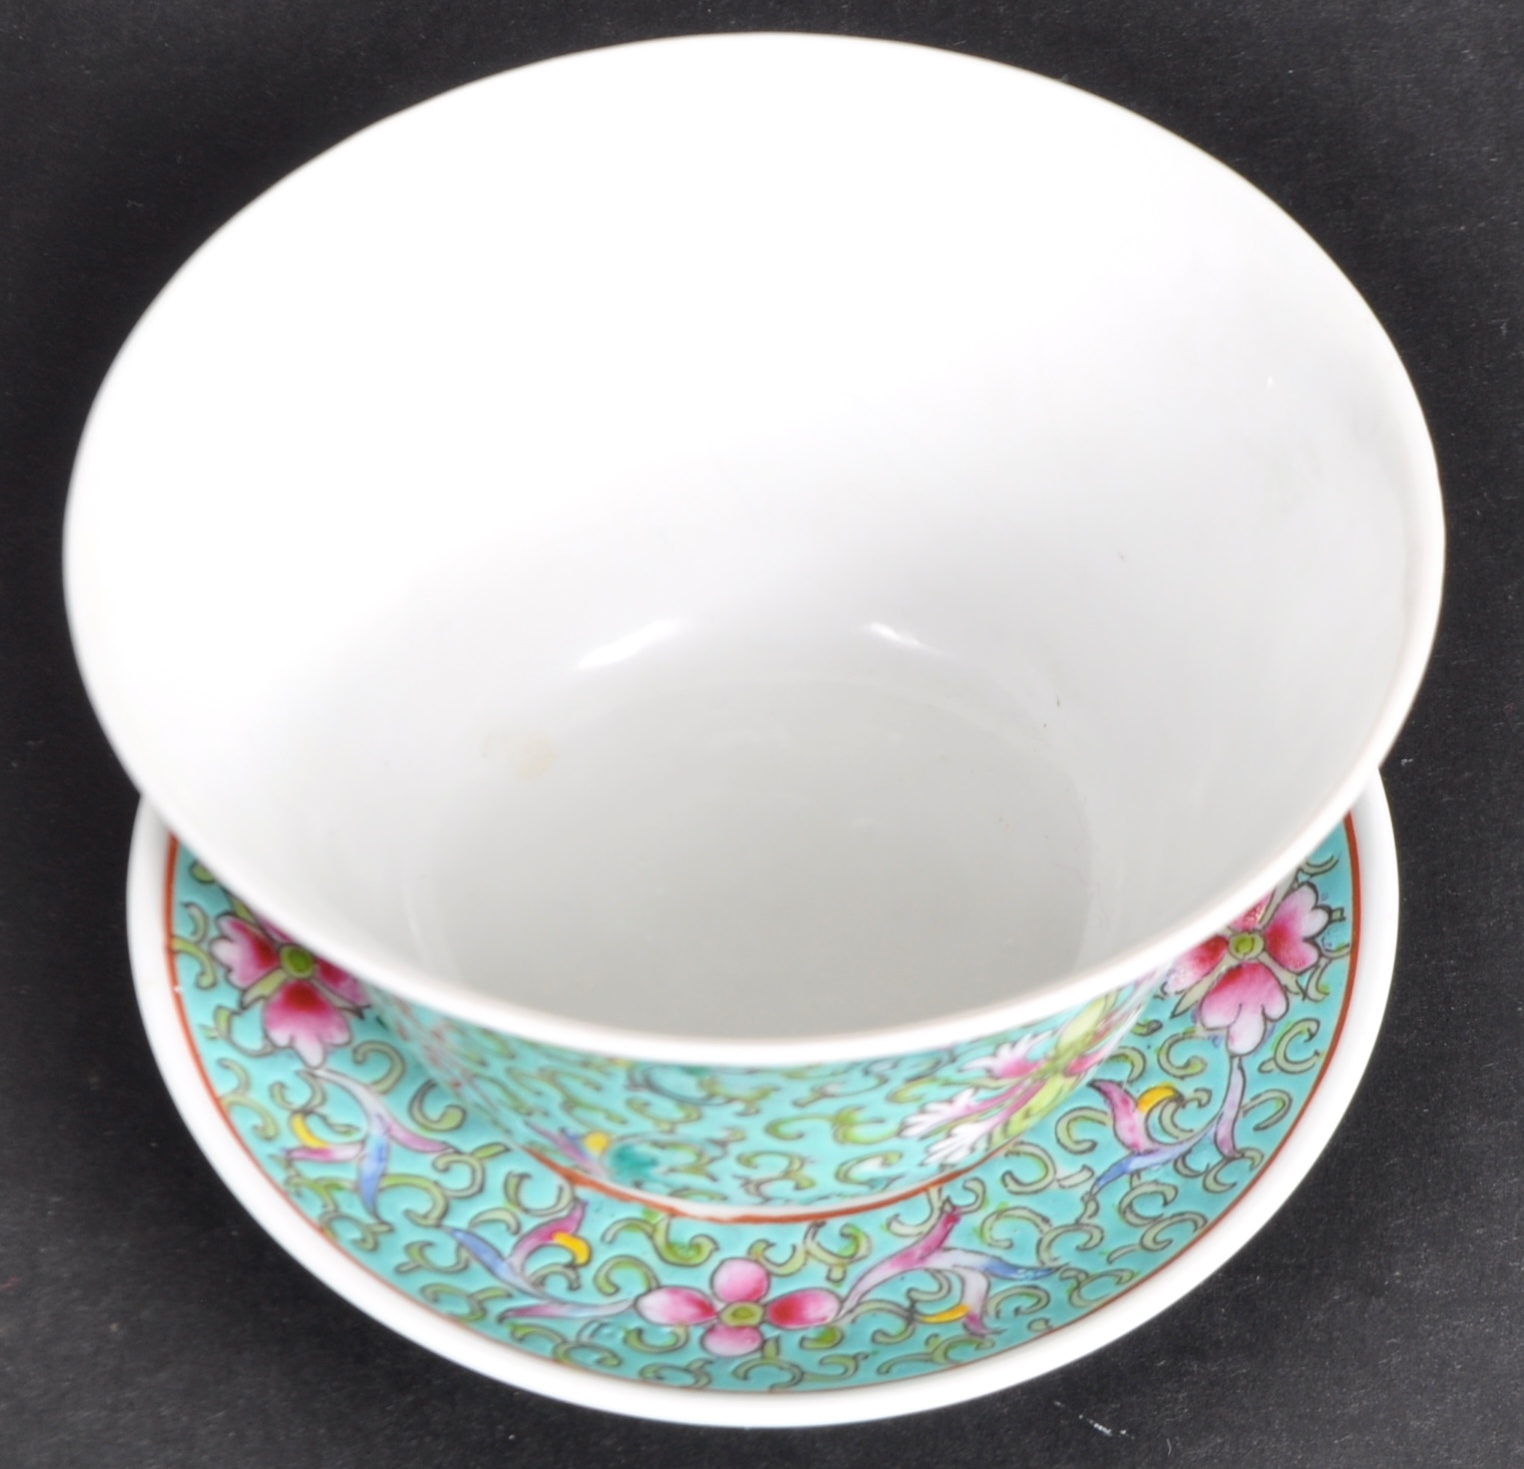 EARLY 20TH CENTURY CHINESE PORCELAIN CUP & SAUCER - Image 3 of 6